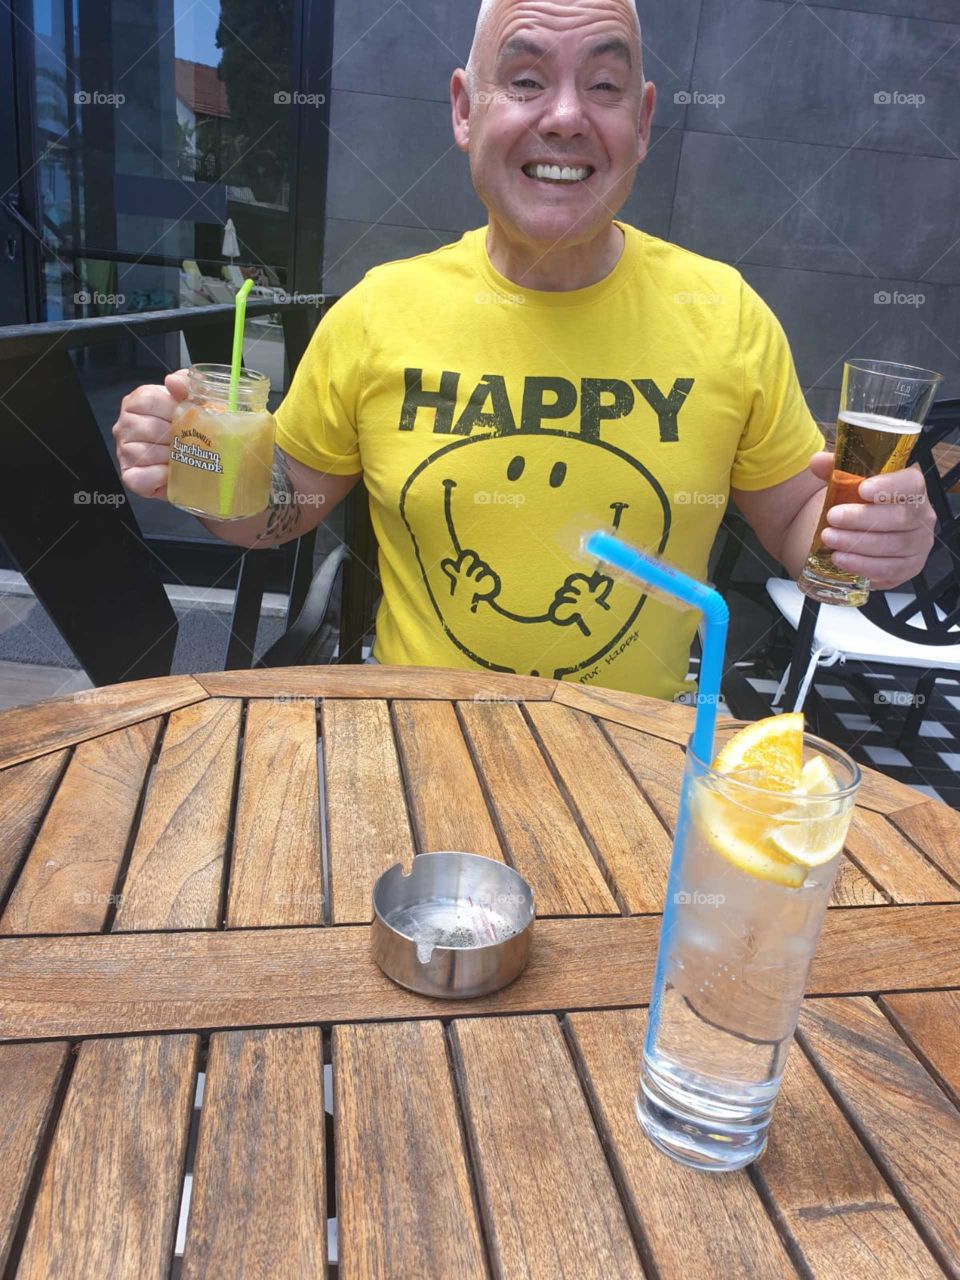 My father in law on holiday Mr Happy